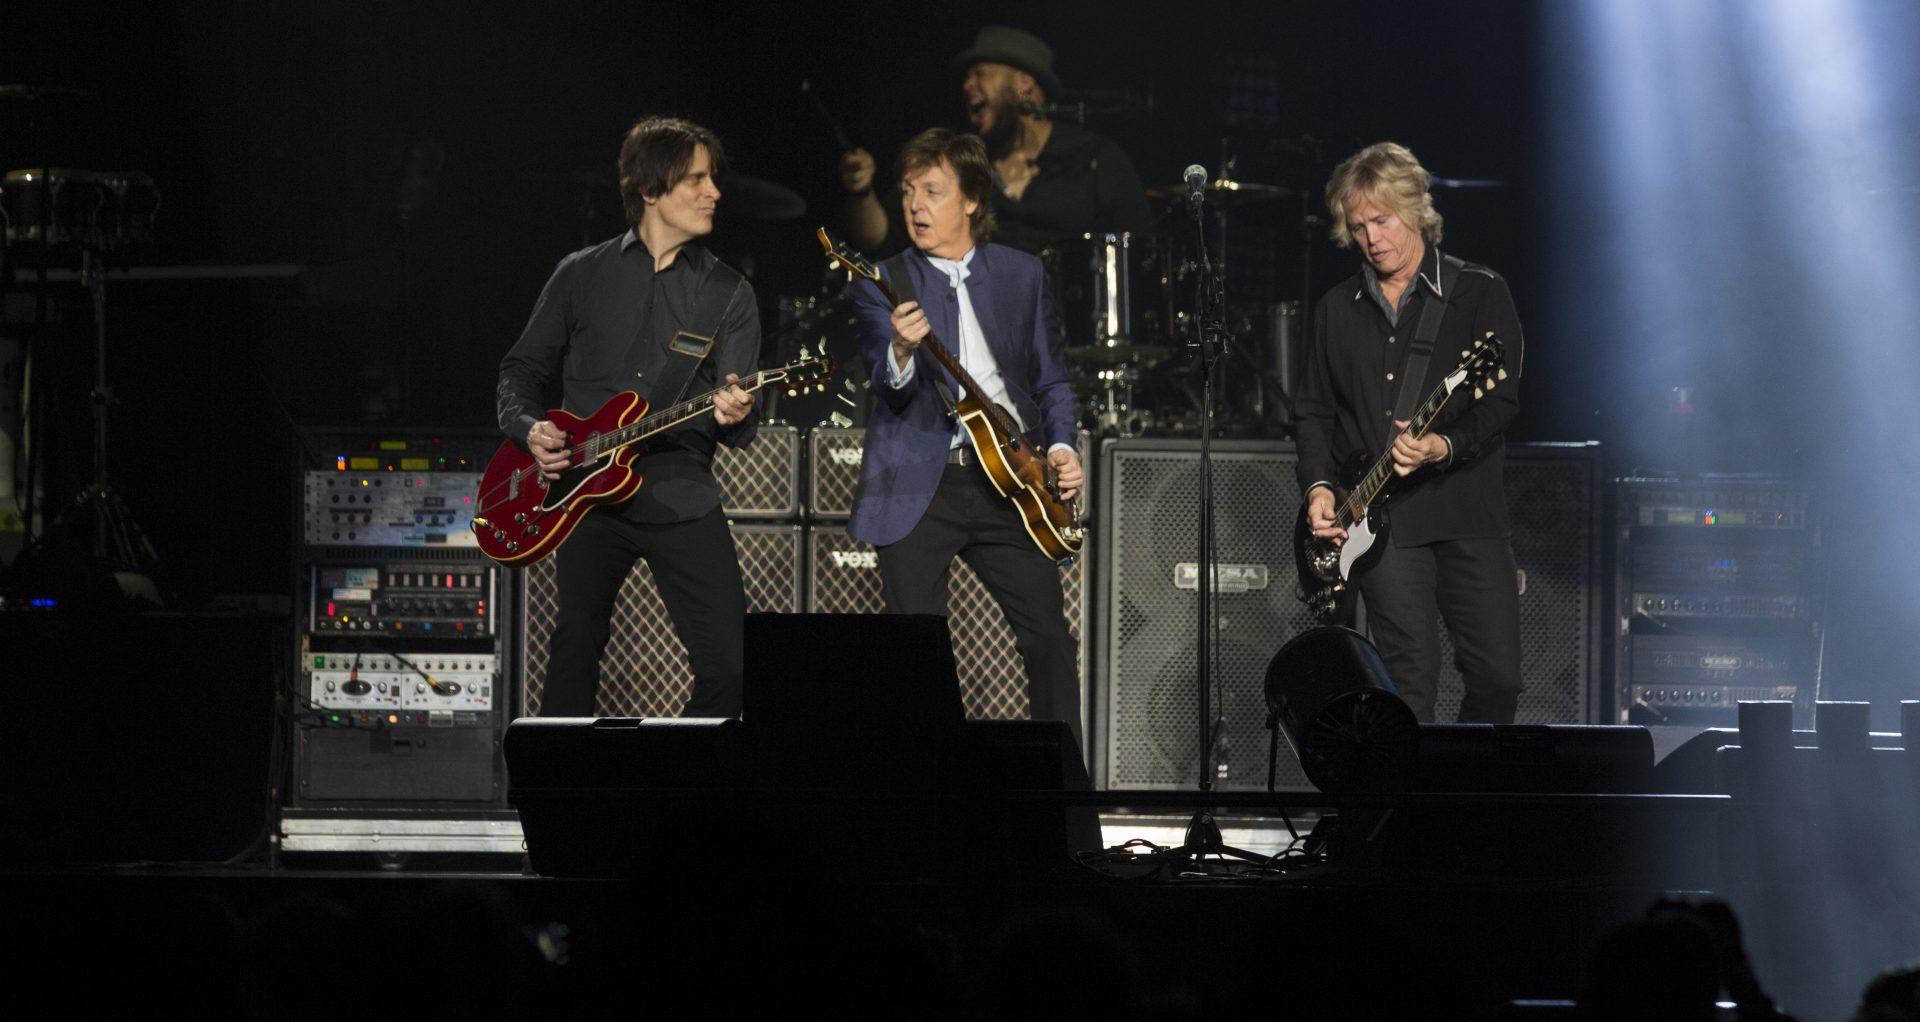 Sir Paul McCartney performs at the Save Mart Center on April 13, 2016. The show kicked of his One on One tour and was his only stop in California. (Darlene Wendels/The Collegian)